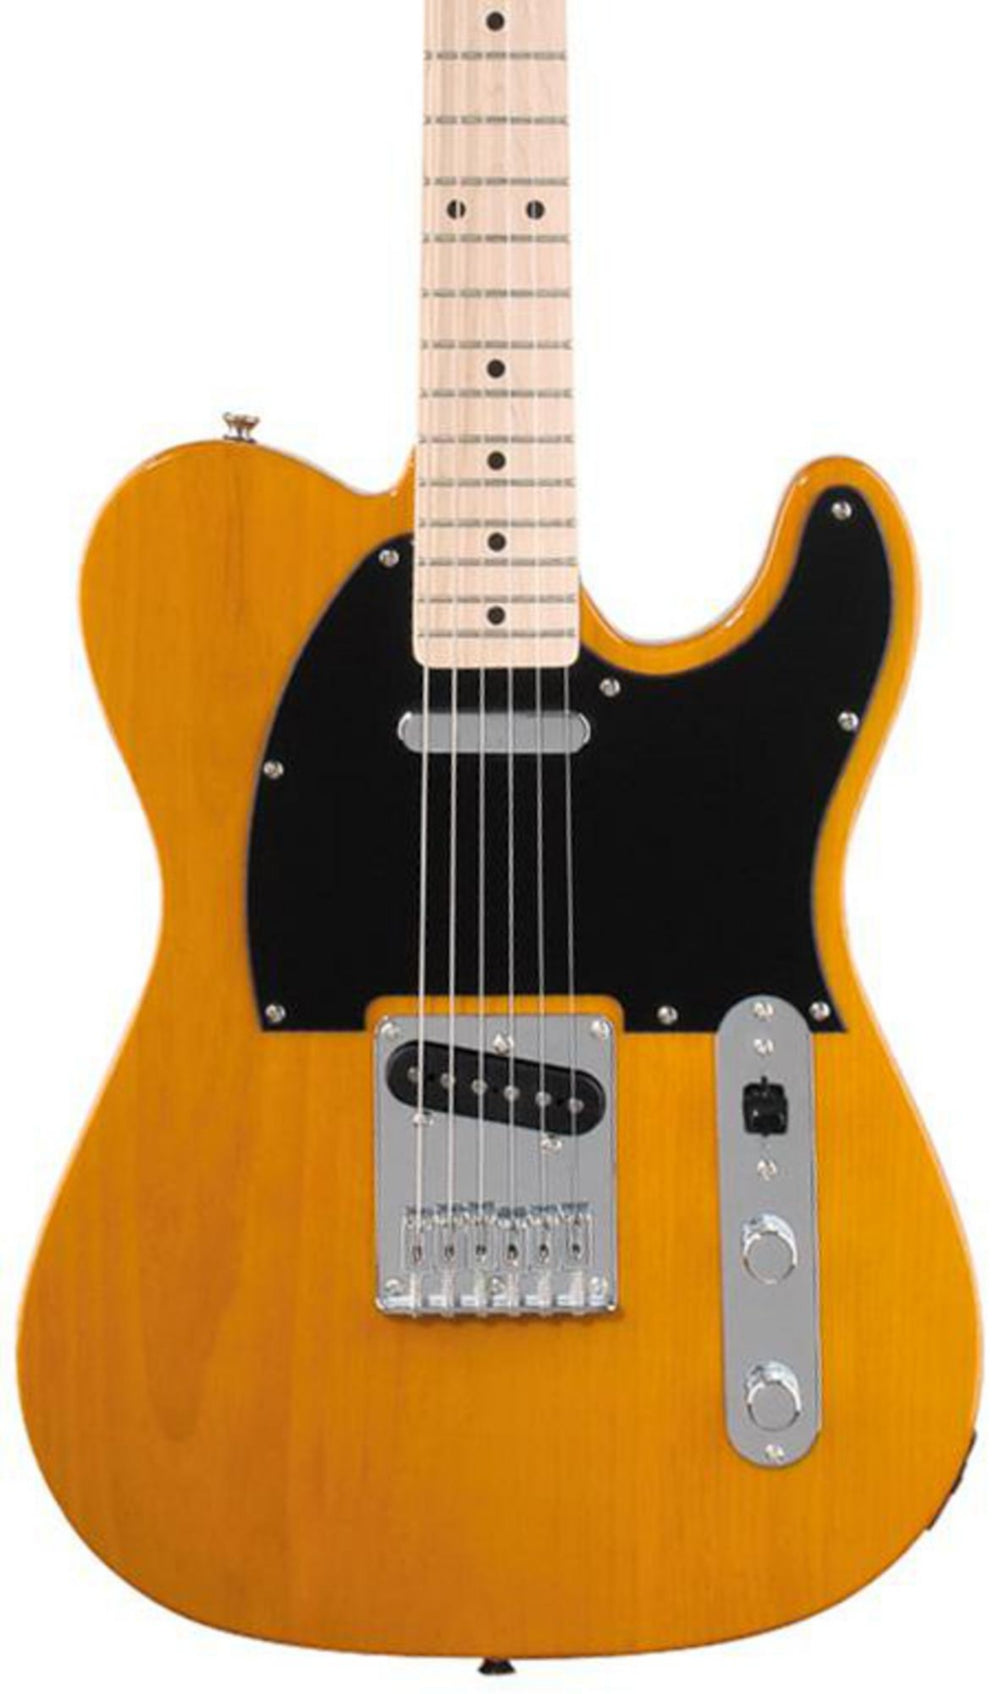 Squier Affinity Series Telecaster, Maple Fingerboard, Butterscotch Blonde 310203550